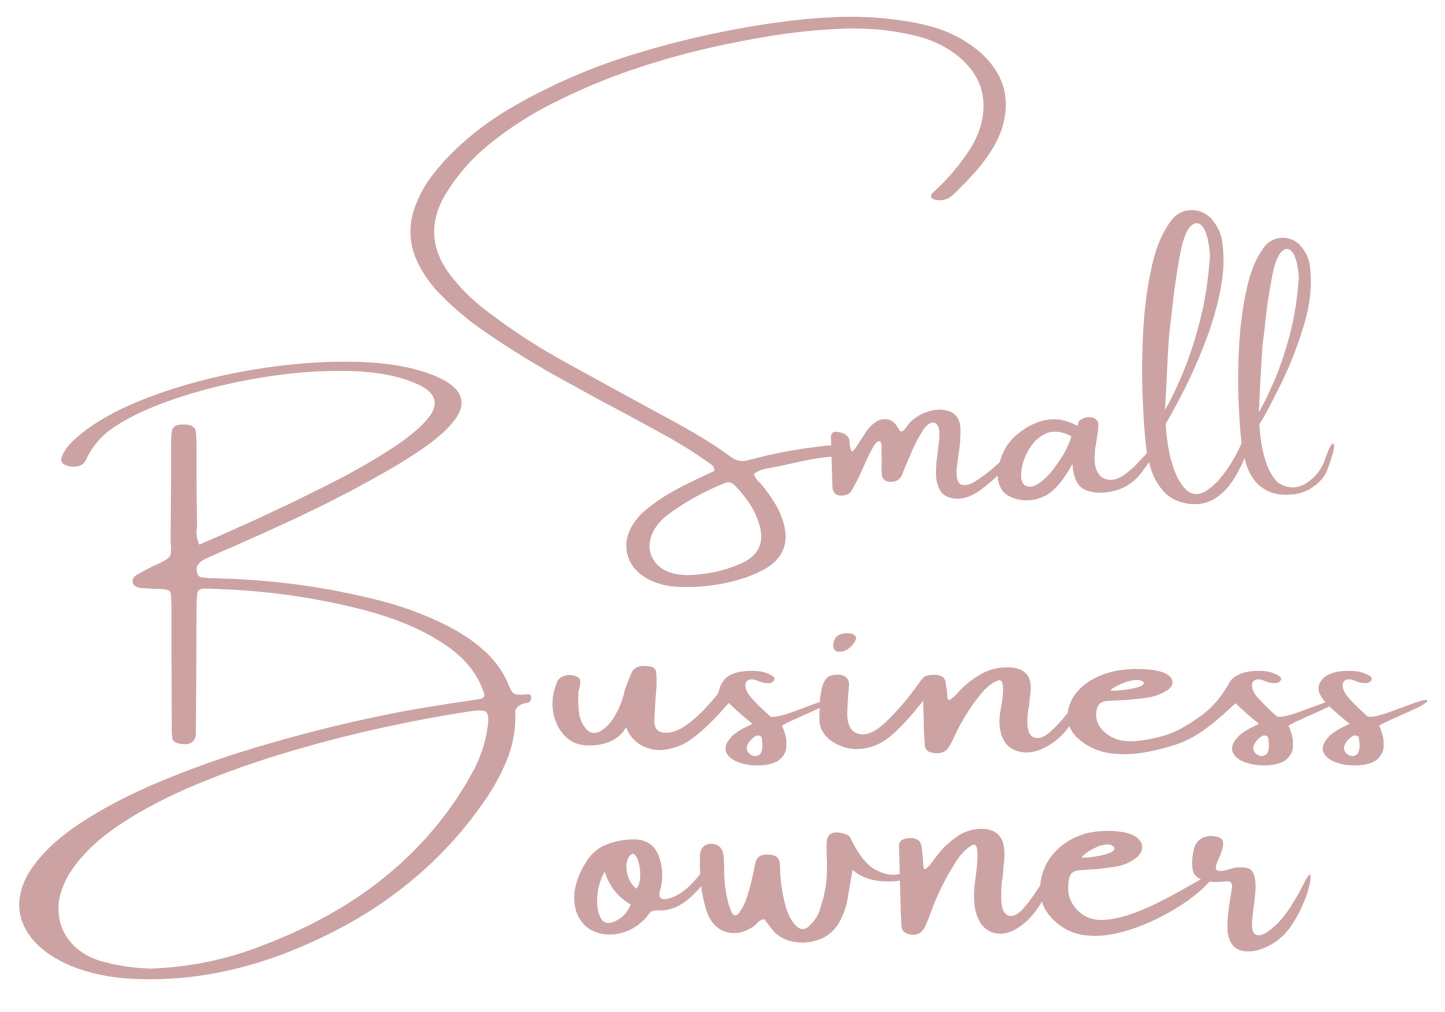 Small Business Owner - Mauve